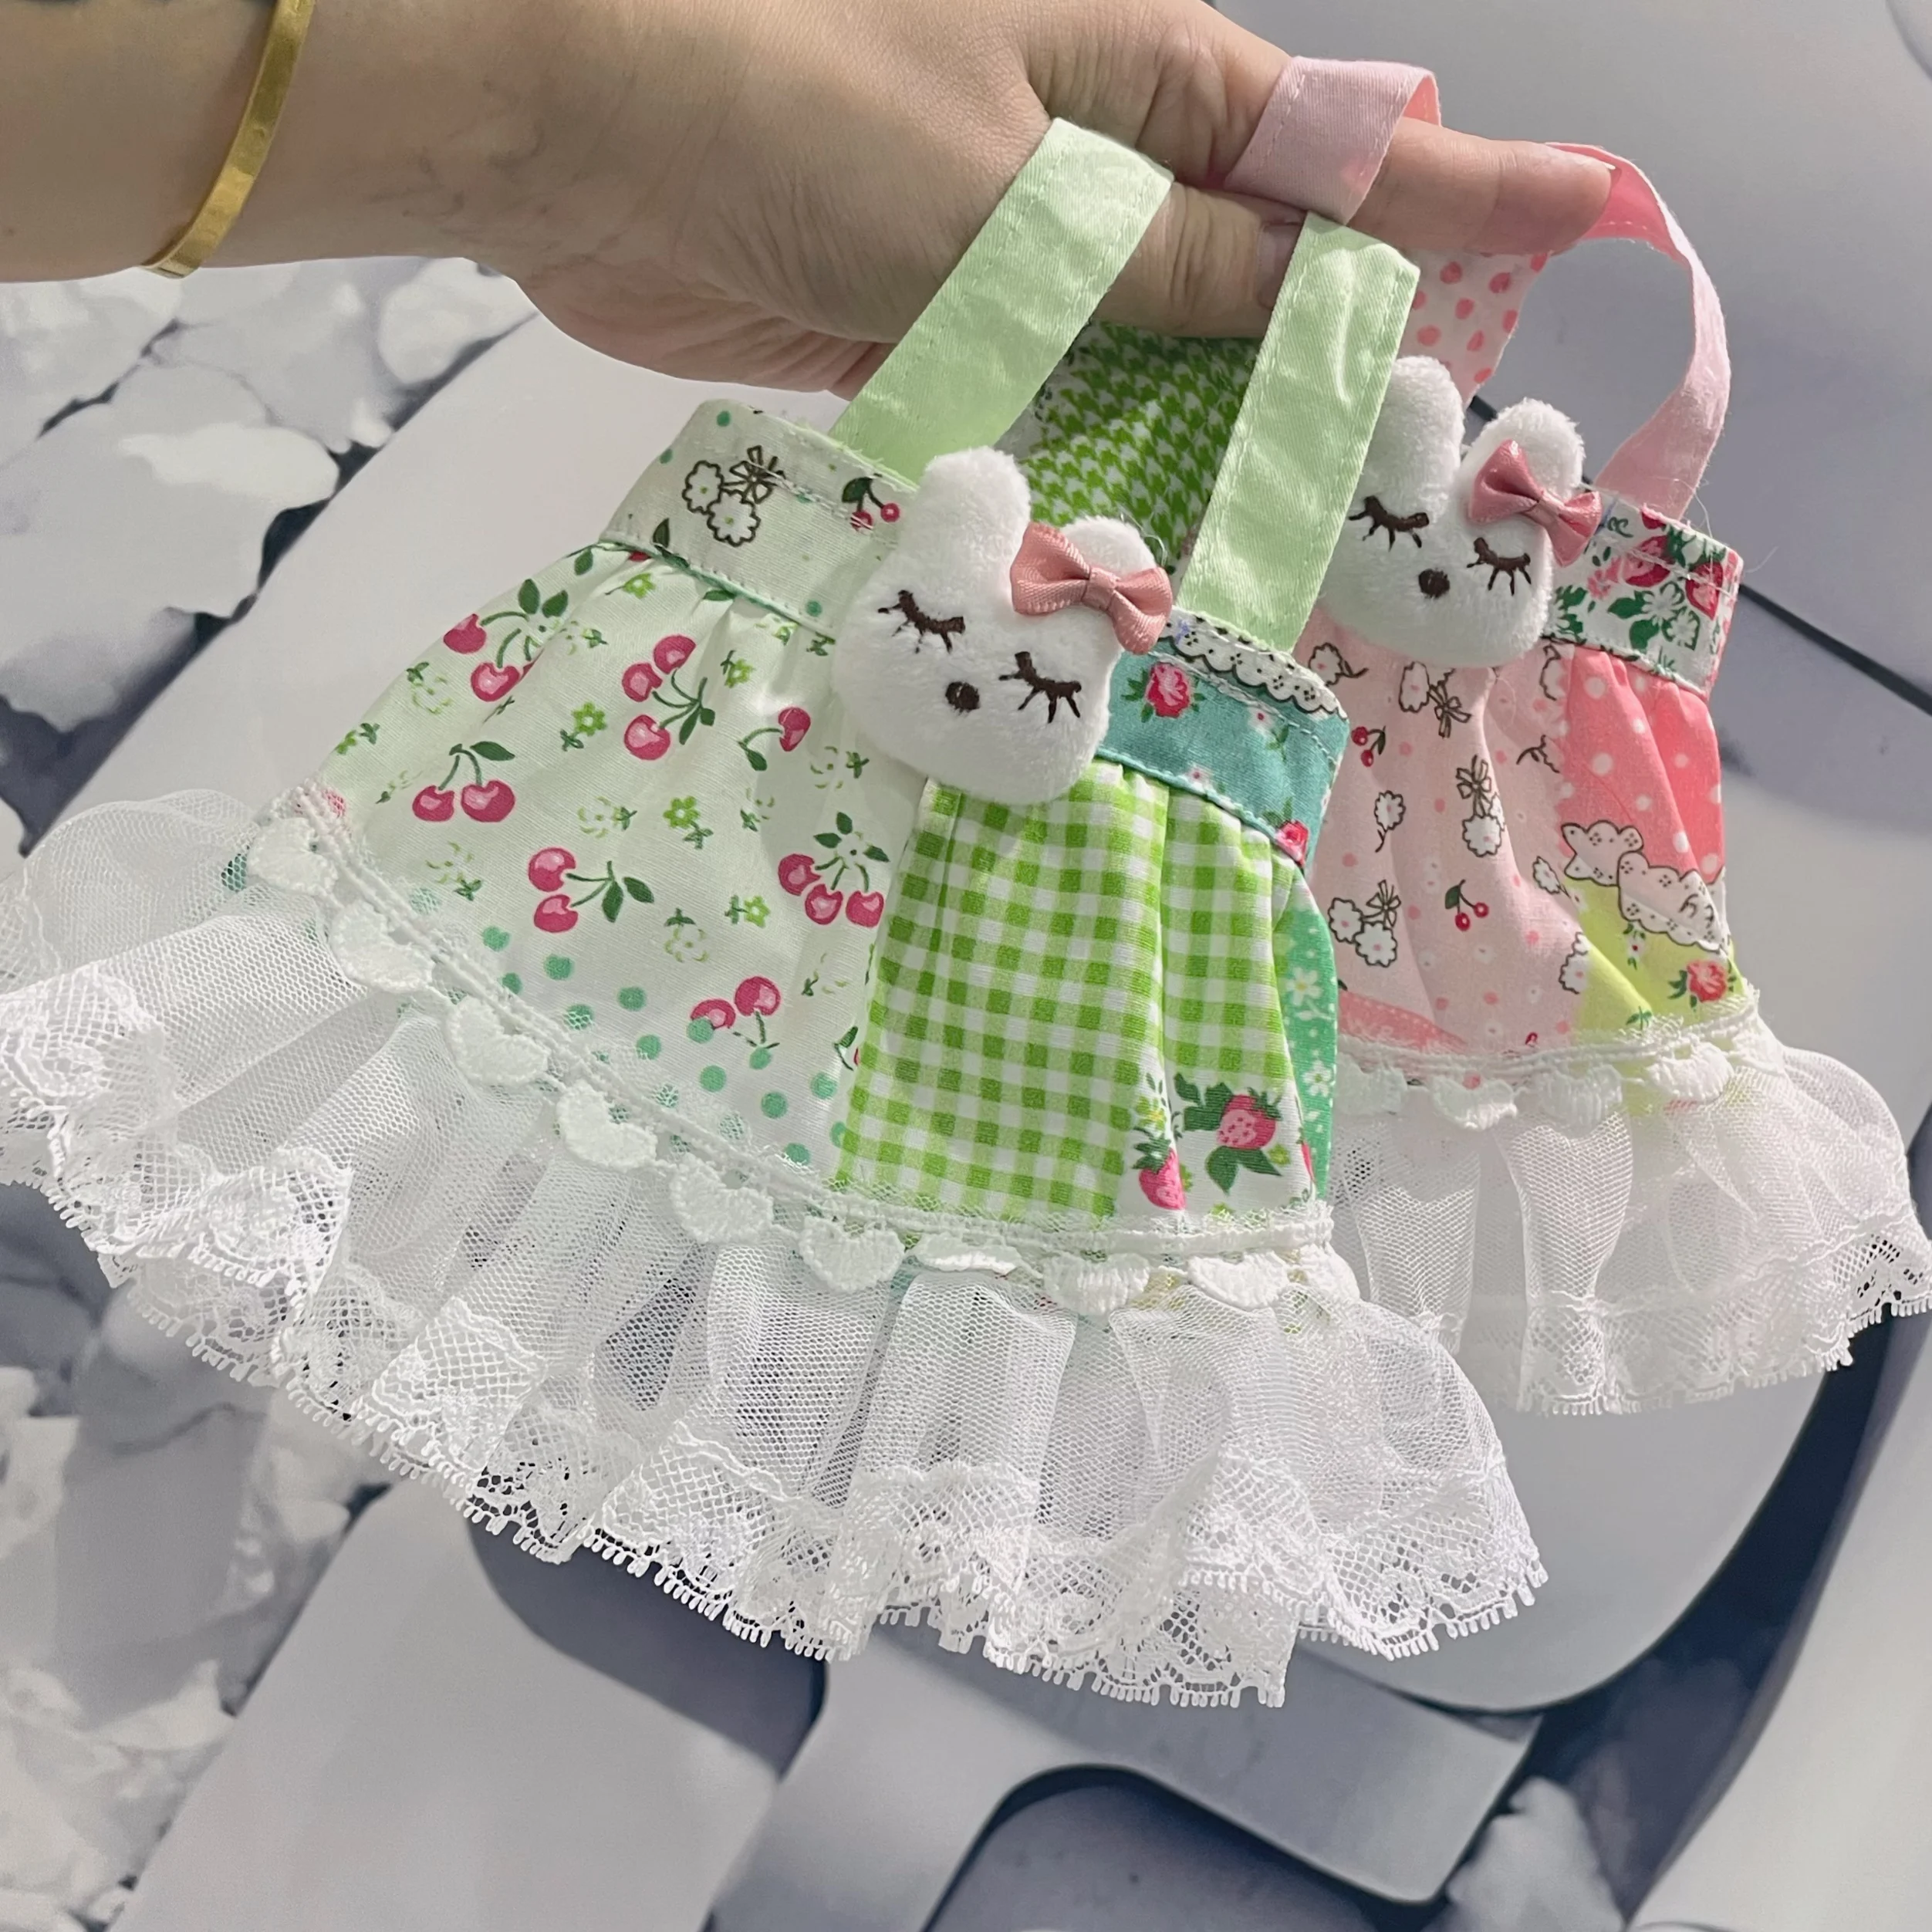 

Puppy Dog Summer Sling Dresses Fashion Cute Flower Print Pink Green Pet Dog Clothes Casual Outerwear Chihuahua Poodle Clothing